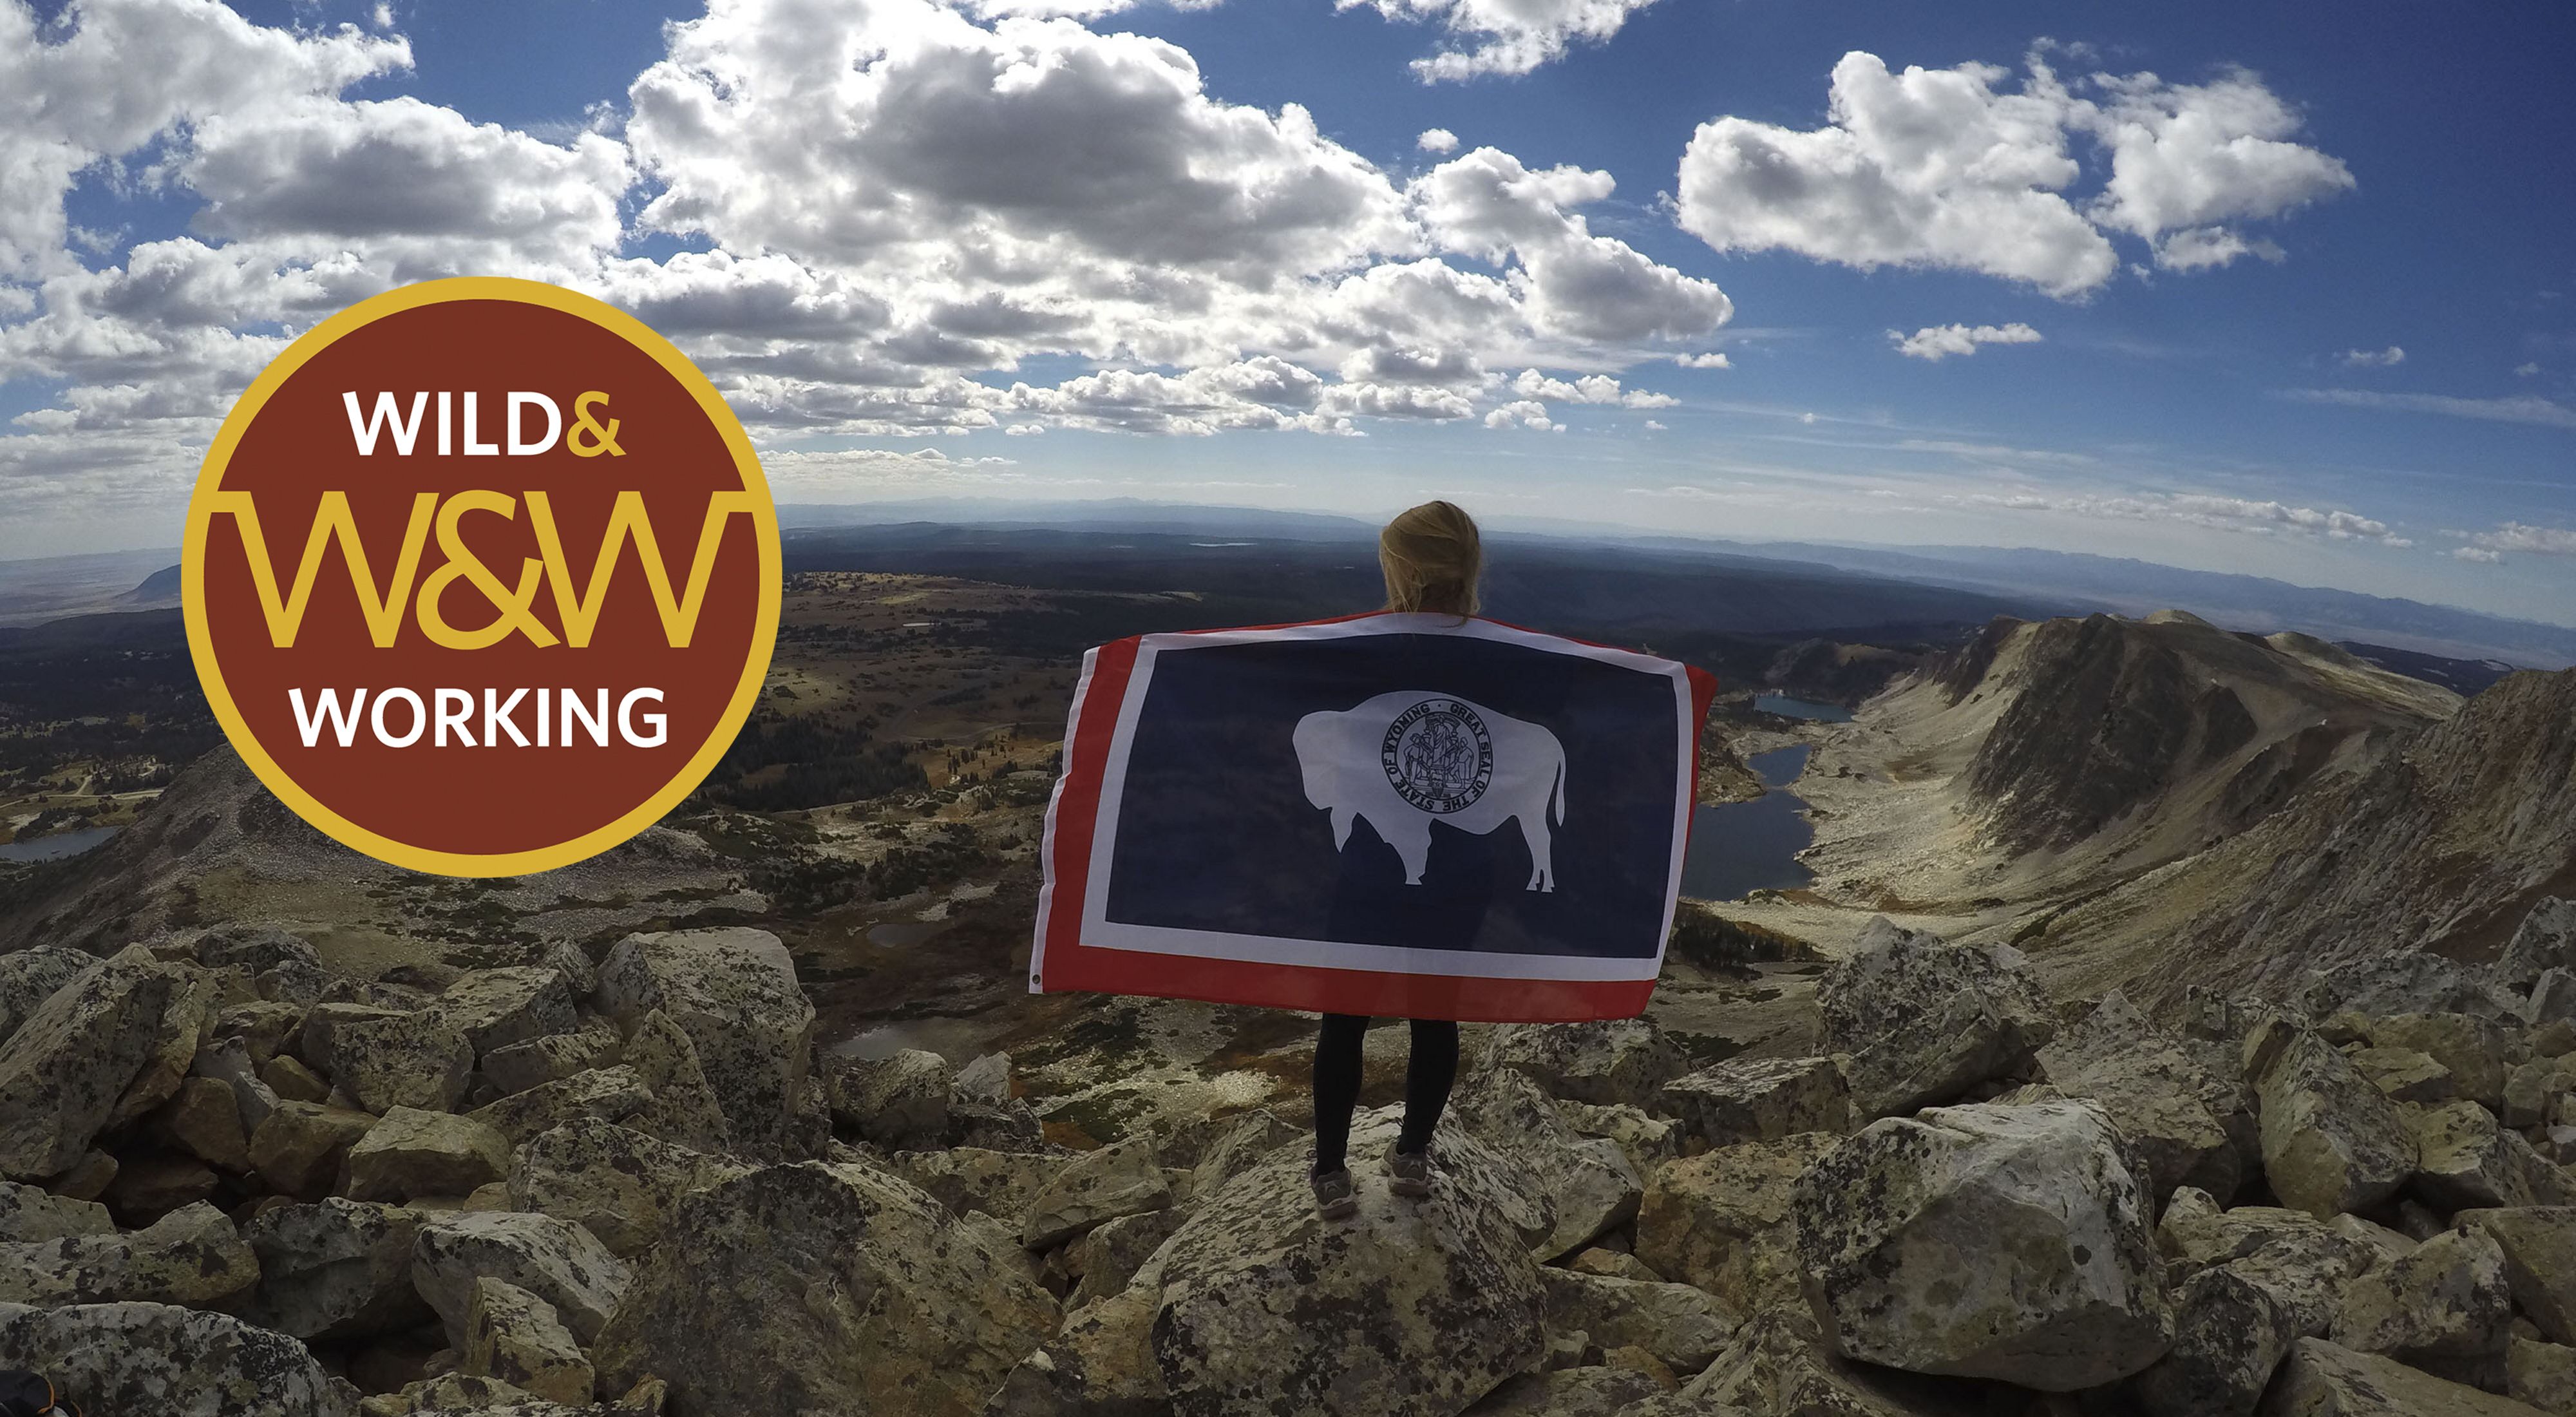 Girl with Wyoming state flag stands on mountain under cloudy blue skies.